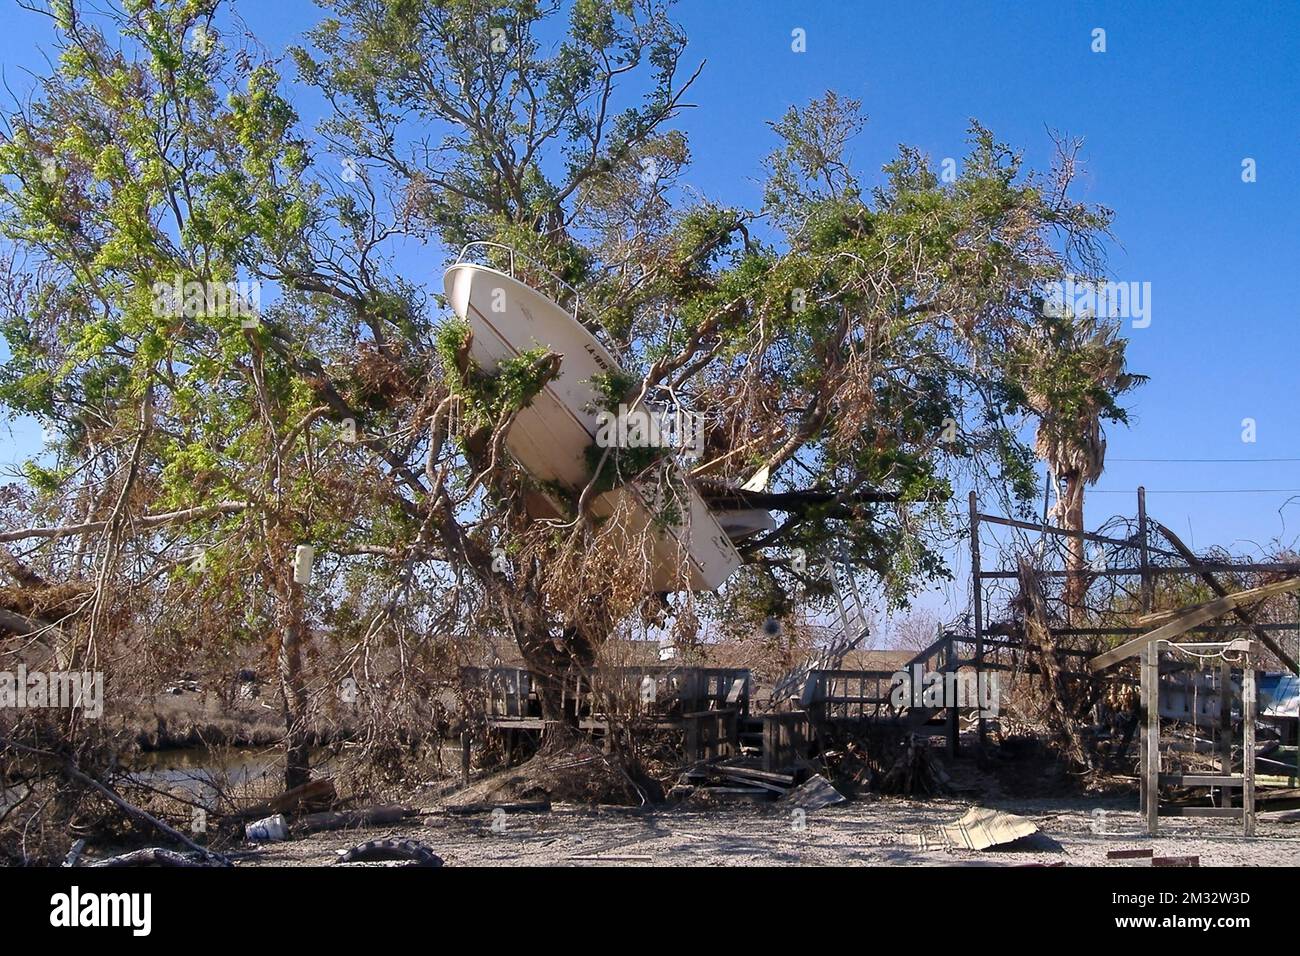 Boat stuck in the branches of a tree in the aftermath of Hurricane Katrina in Louisiana. (USA) Stock Photo